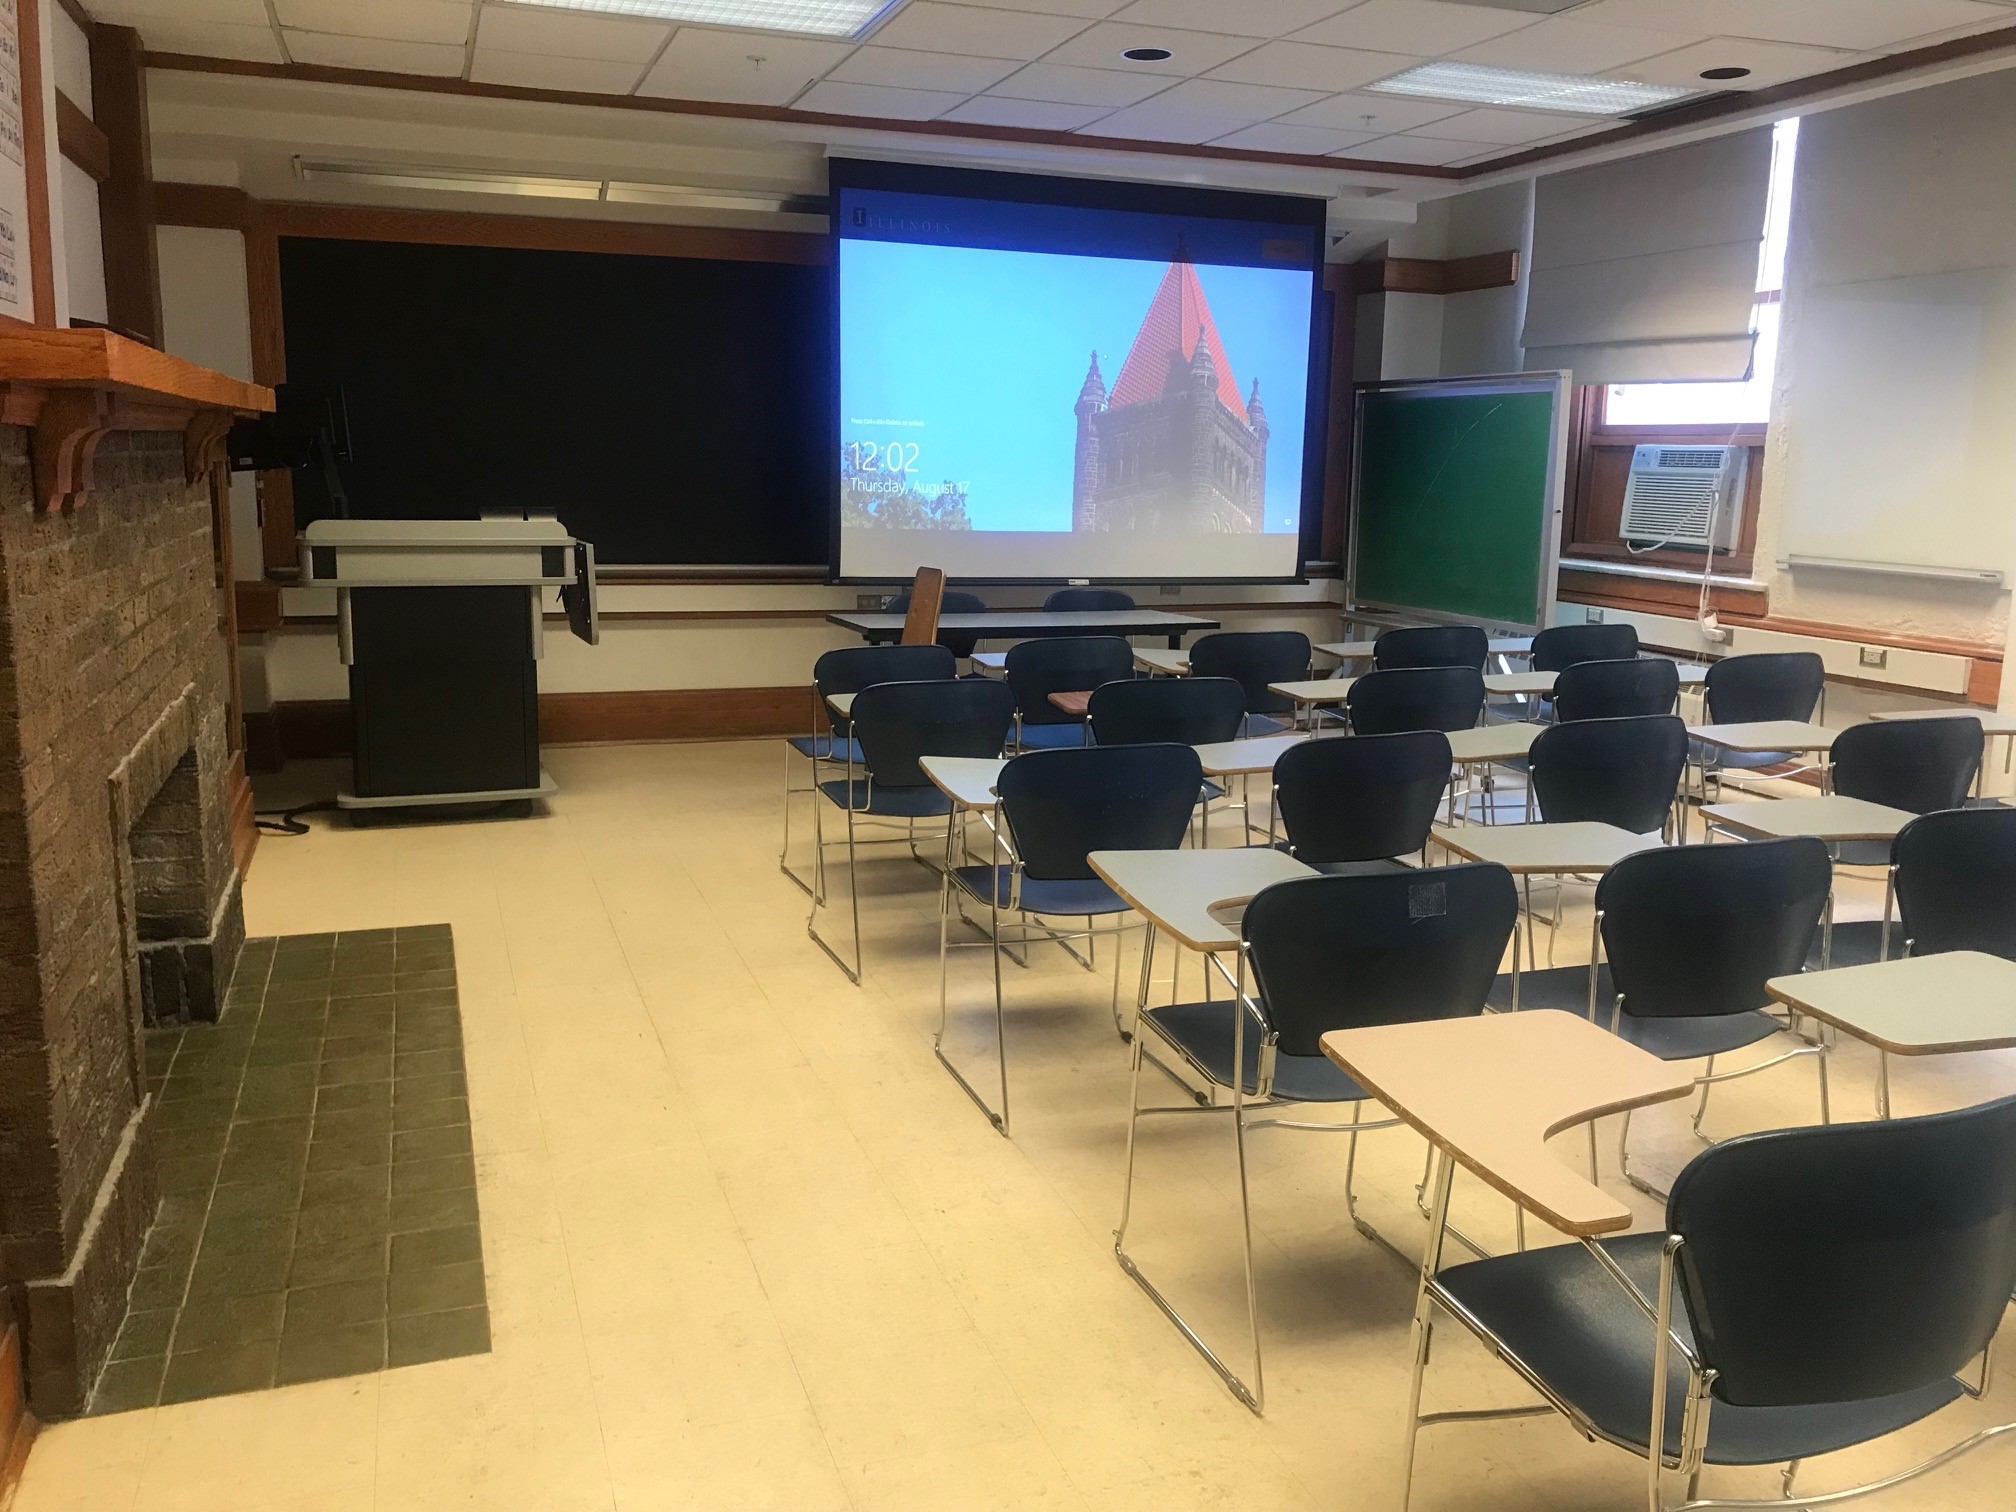 A view of the classroom with movable tableted arm chairs, projector and screen, chalk board, instructor lectern, and instructor table in front.